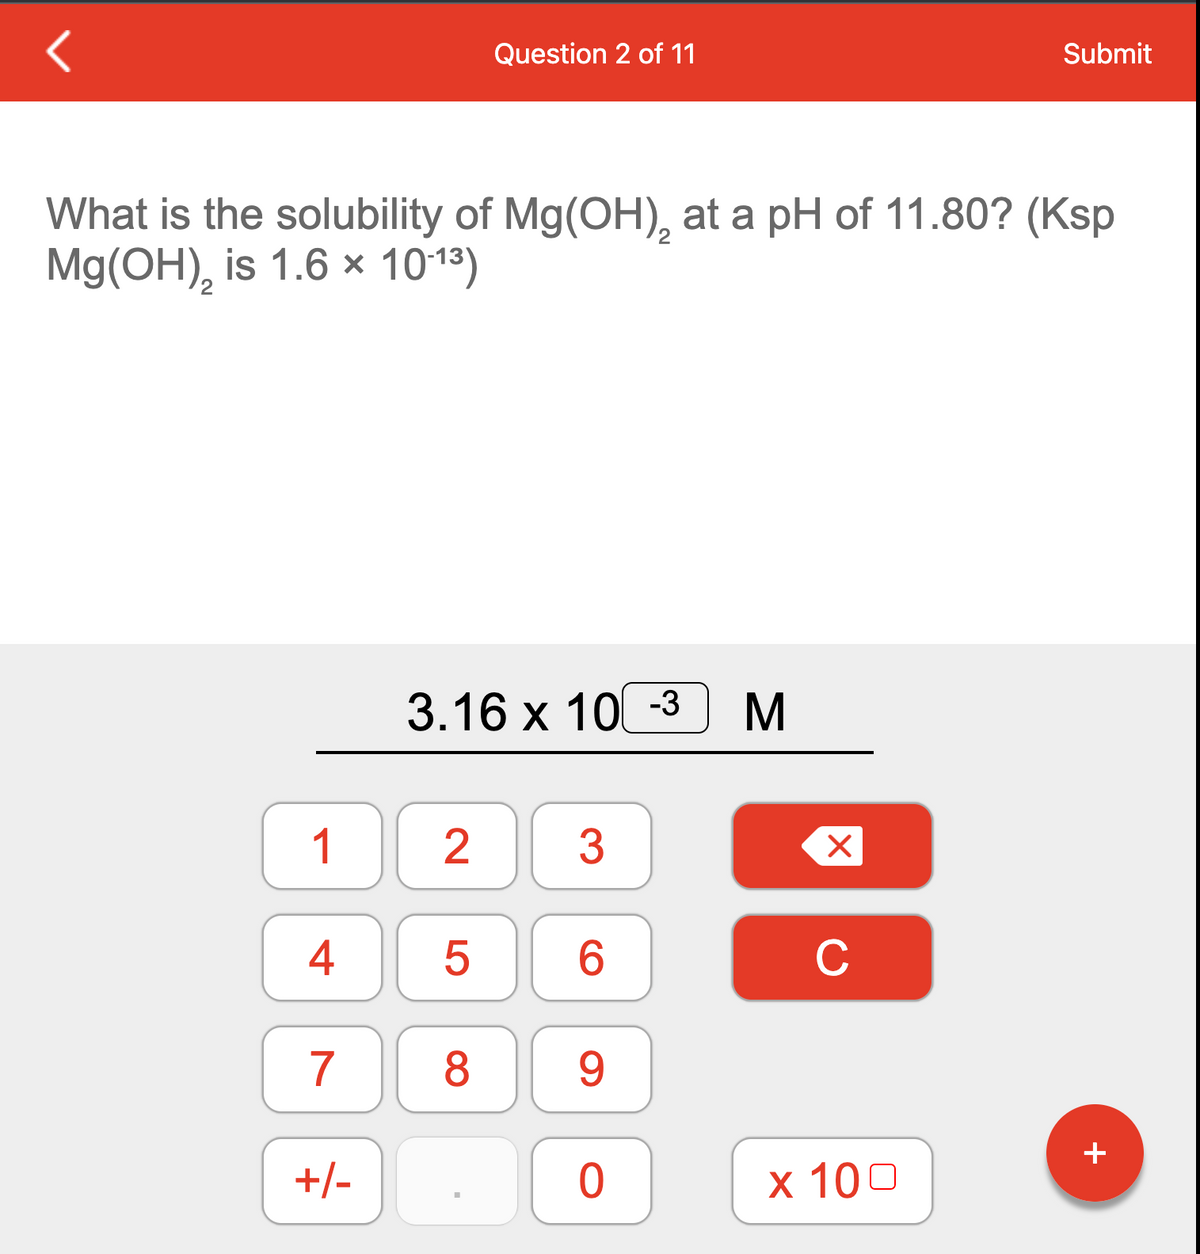 Question 2 of 11
Submit
What is the solubility of Mg(OH), at a pH of 11.80? (Ksp
Mg(OH), is 1.6 × 1013)
3.16 x 10 -3
1
3
4
6.
C
7
8.
+
+/-
х 100
2.
